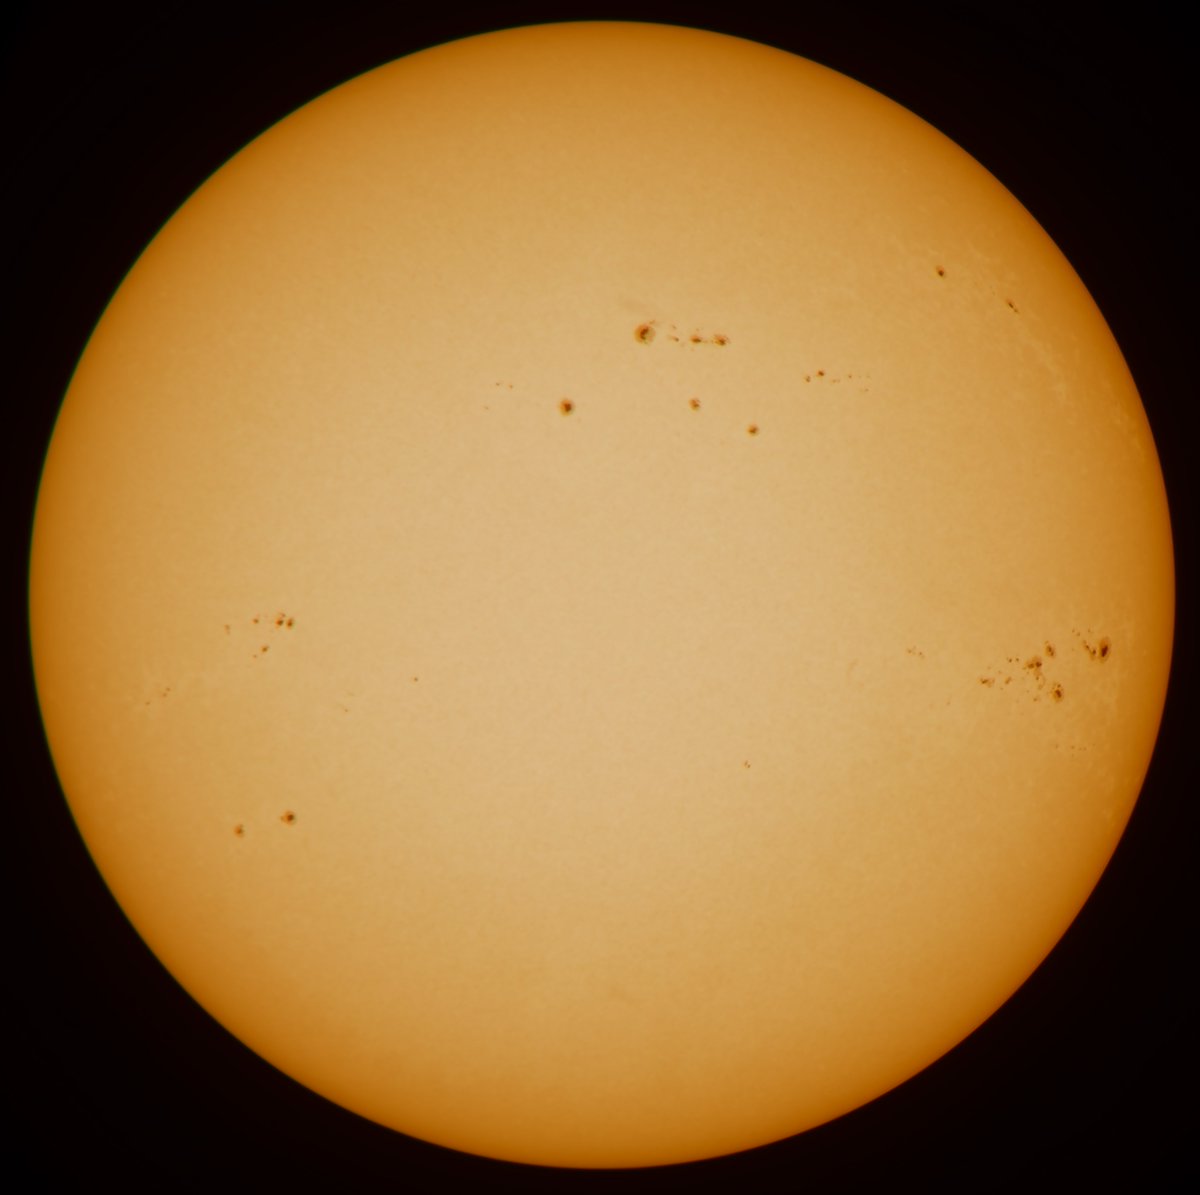 Sun today 23042024. White light safety filter. 17 named active regions and 132 sunspots. Southern AR3638-47 is crackling with M-class solar flares. #astrophotography #sun #solar #sunhour #stormhour #thephotohour #sunspots